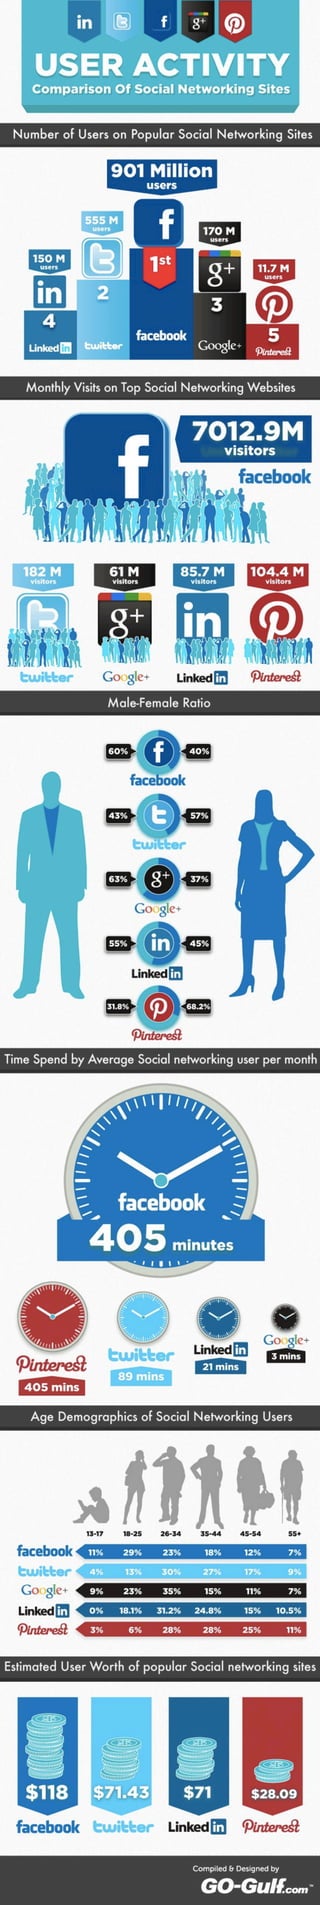 2012 Social Networking Users Infographic